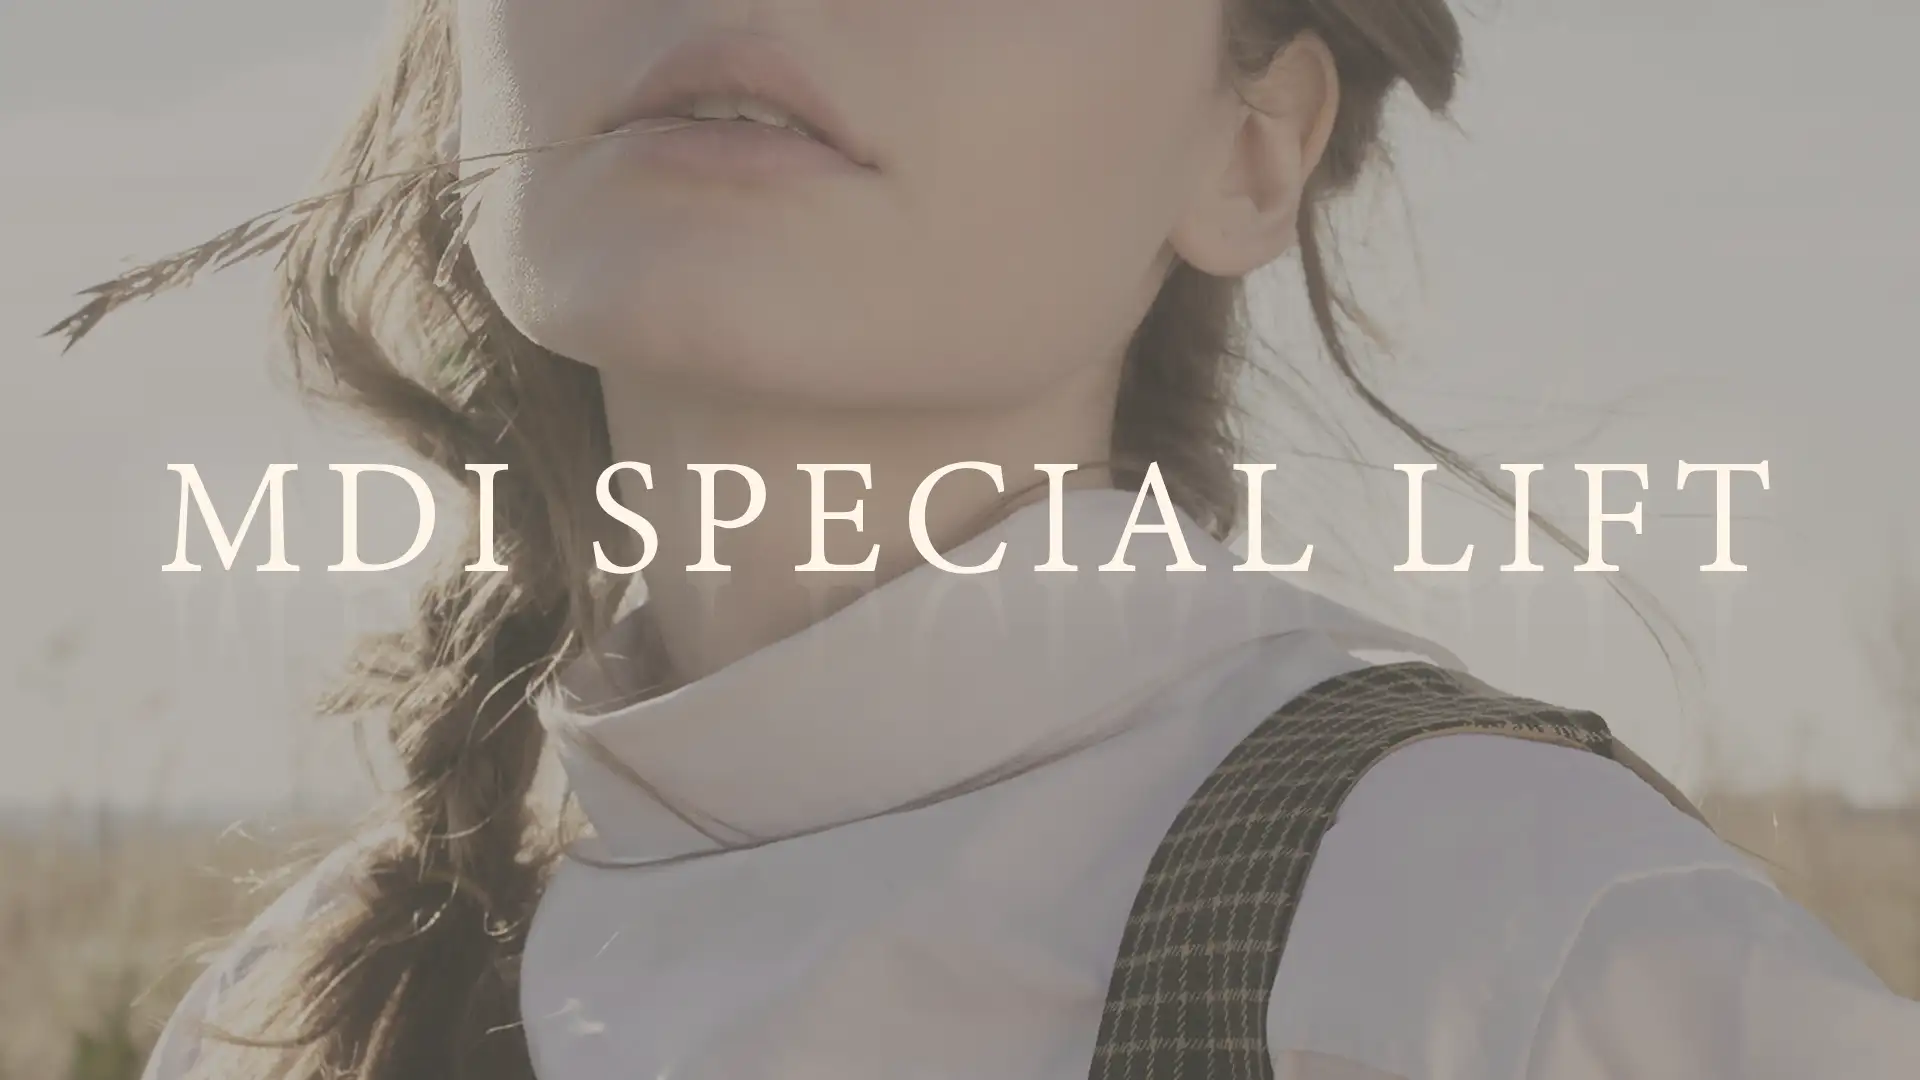 05_Special_LIFT-MDICLINIC